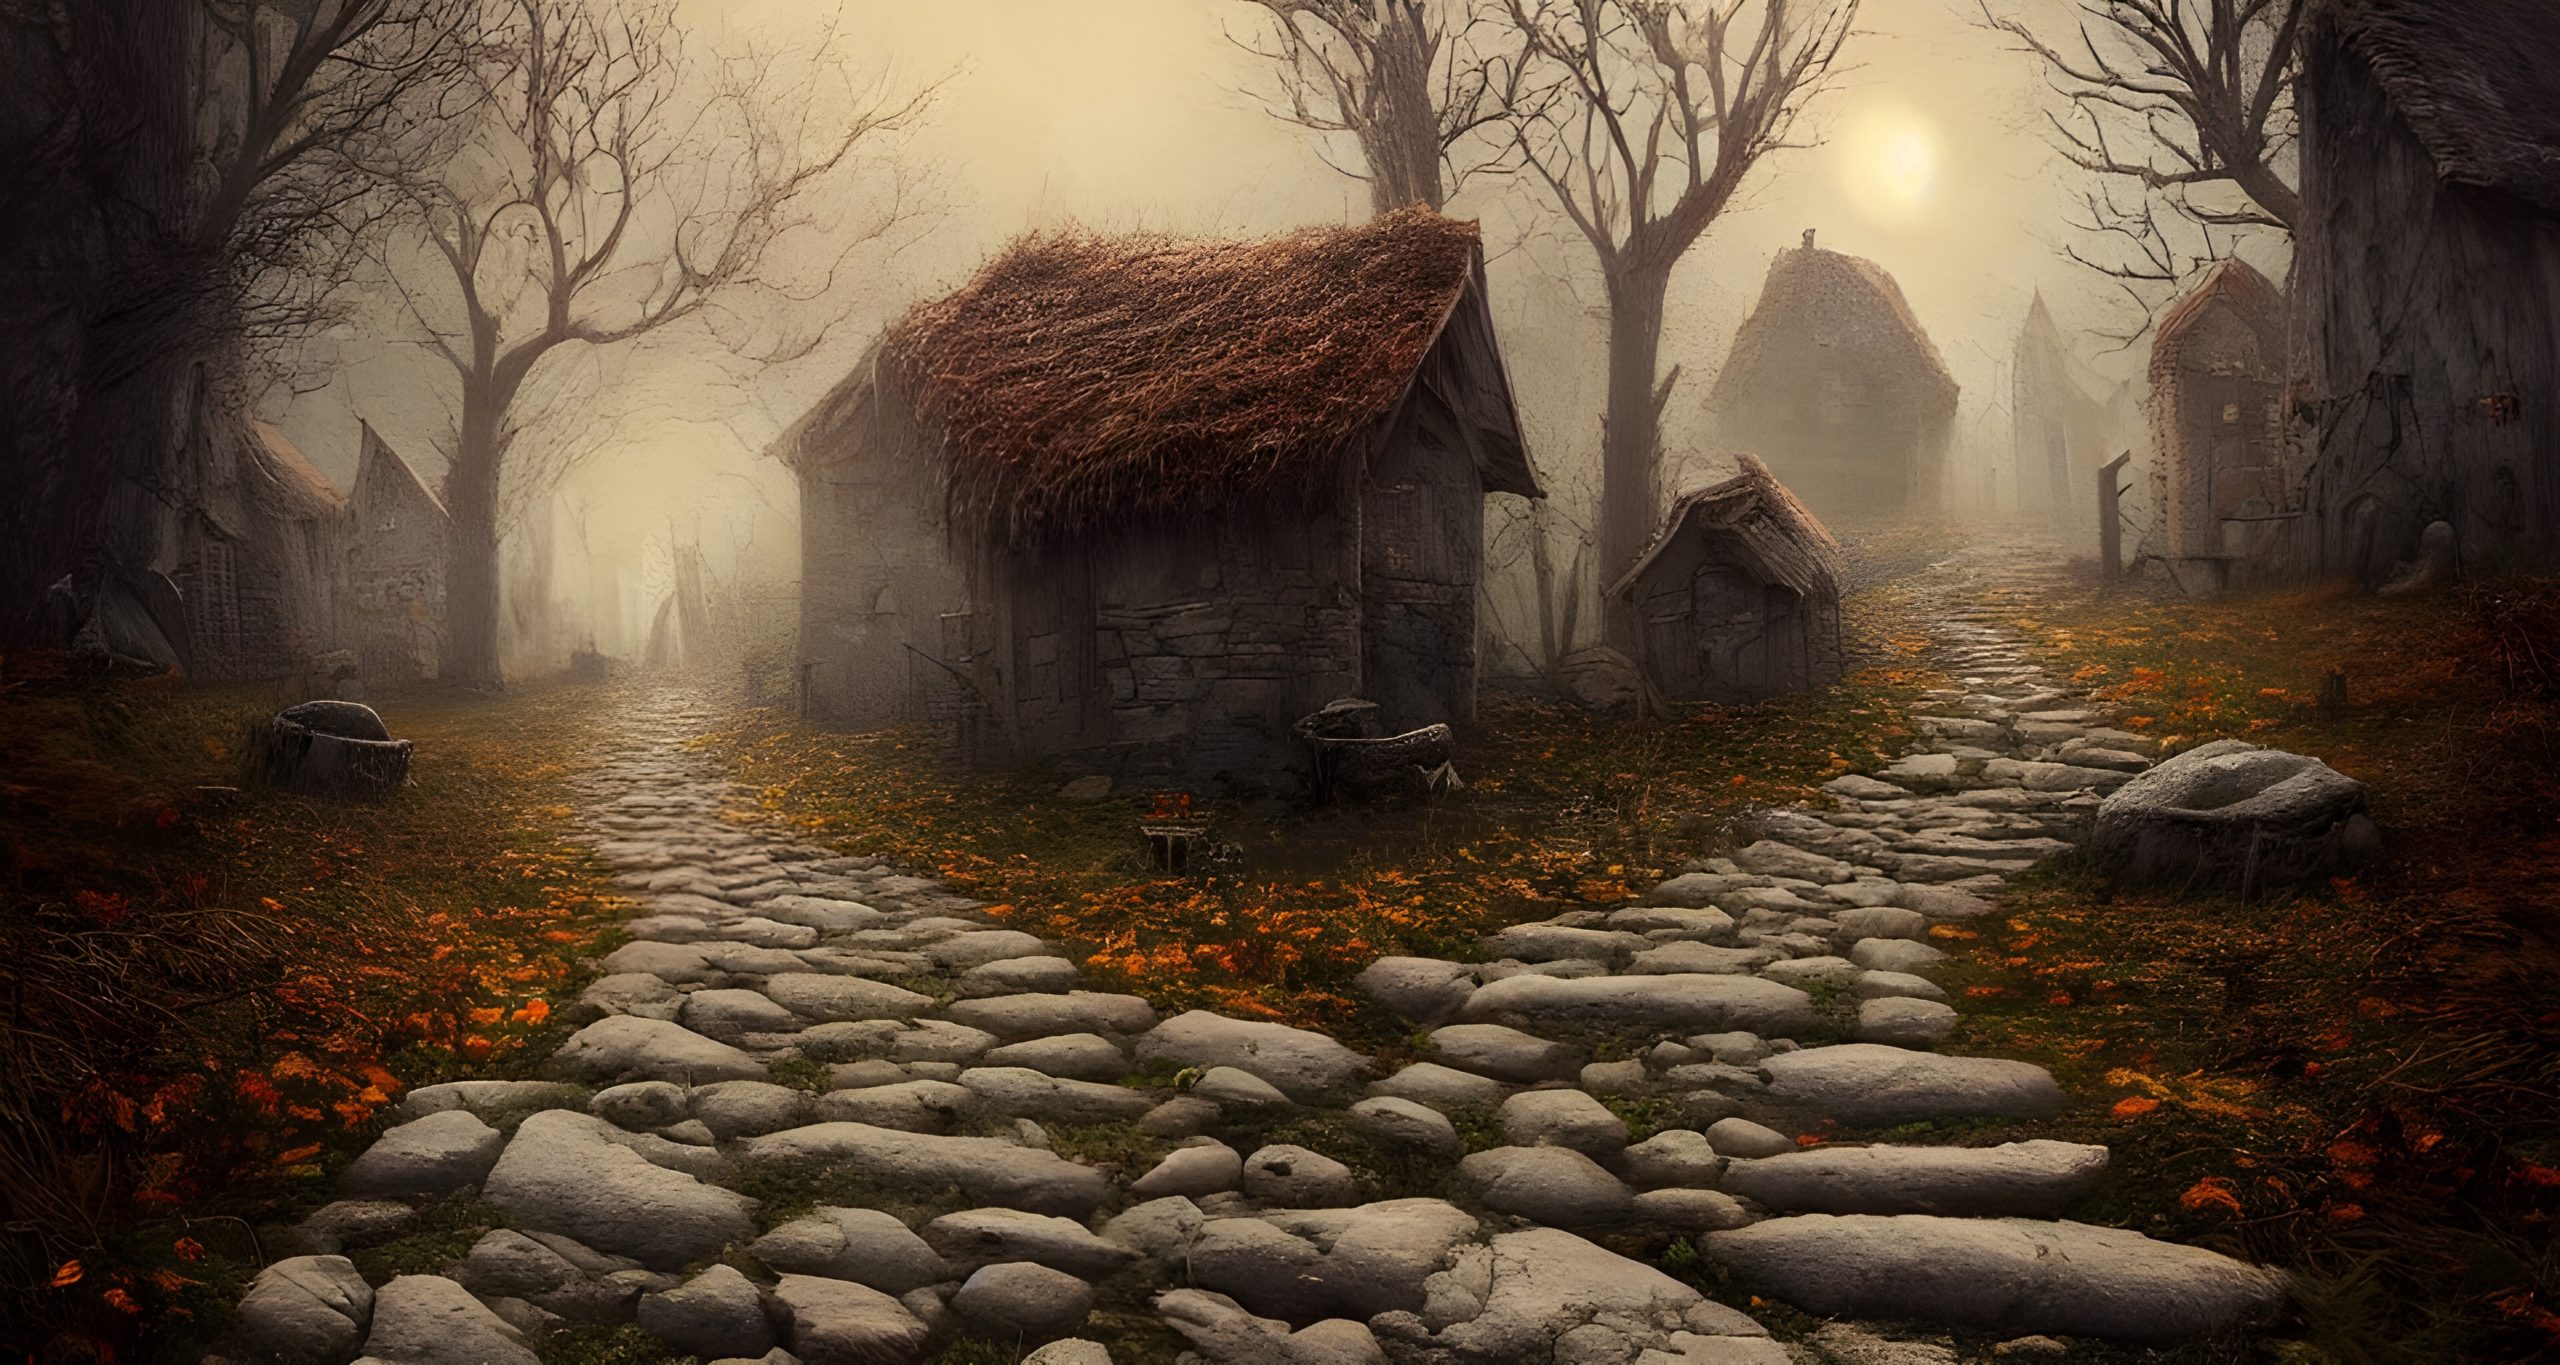 Illustration,Of,A,Stone,Path,Road,To,An,Old,Mystical